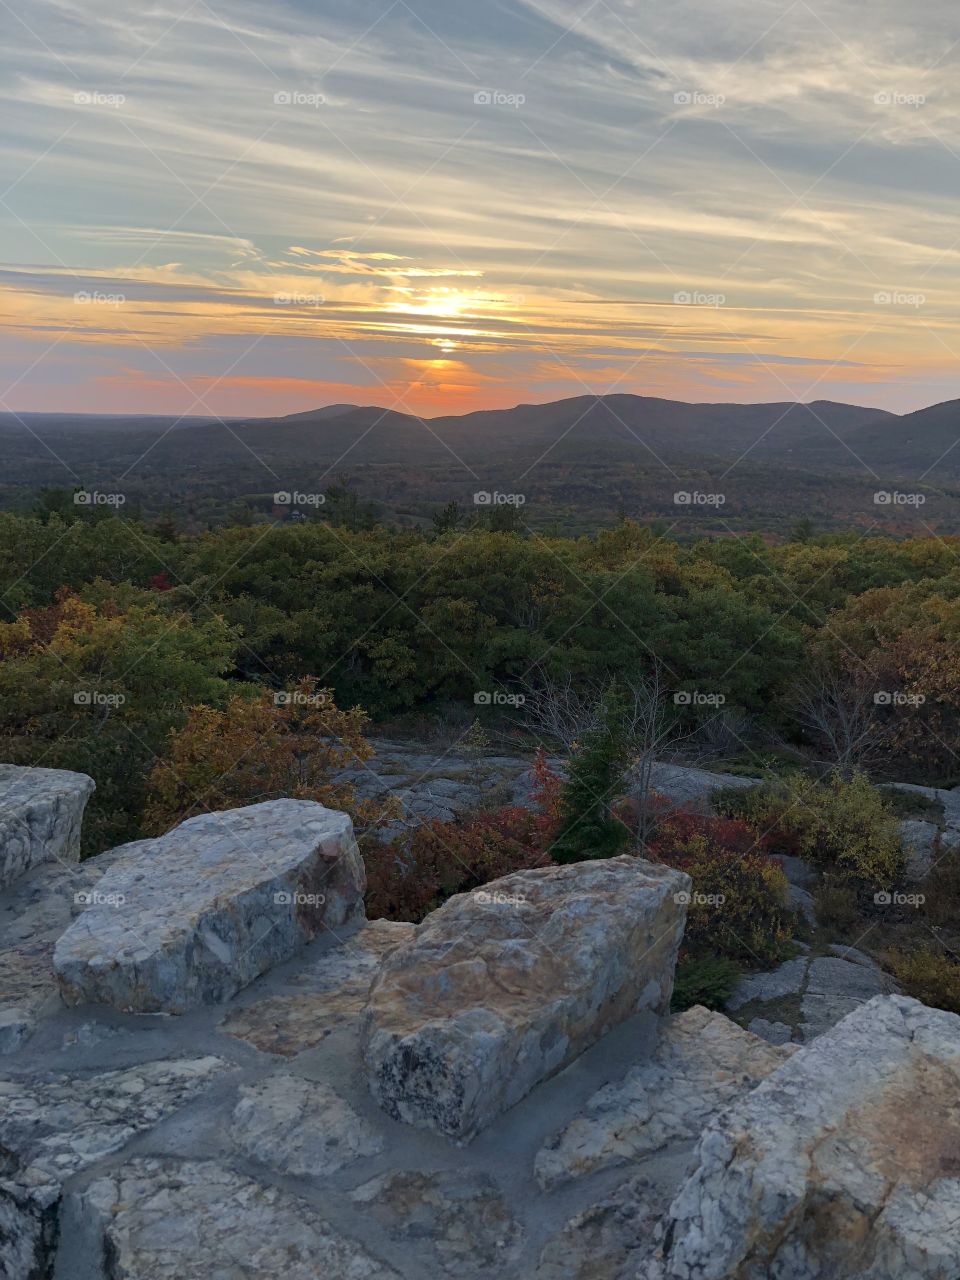 Scenic view of a late Autumn sunset over forested mountains from atop a stone lookout tower on the peak of Mount Battie in Camden, Maine 